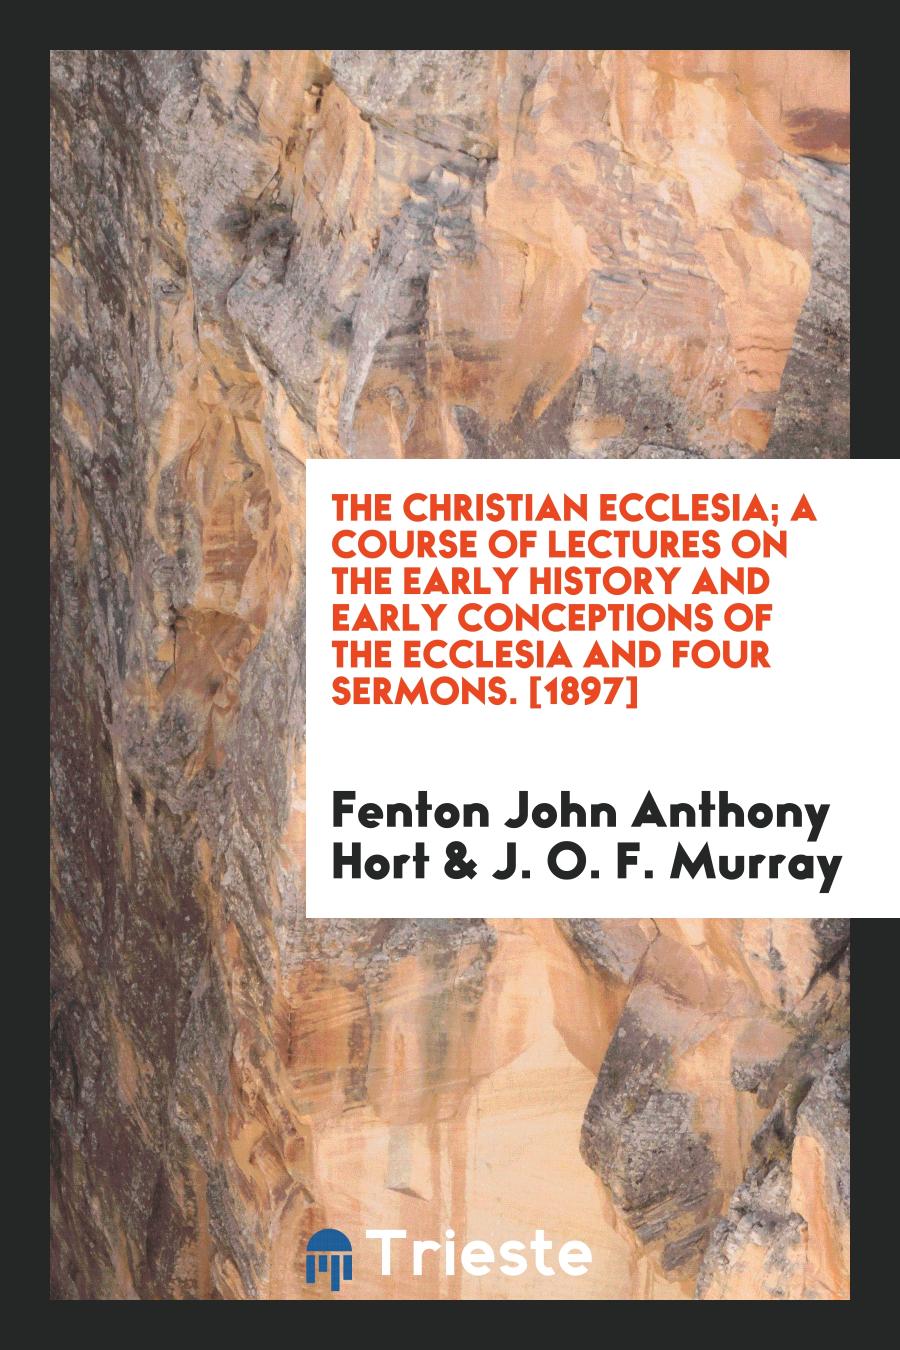 The Christian Ecclesia; A Course of Lectures on the Early History and Early Conceptions of the Ecclesia and Four Sermons. [1897]